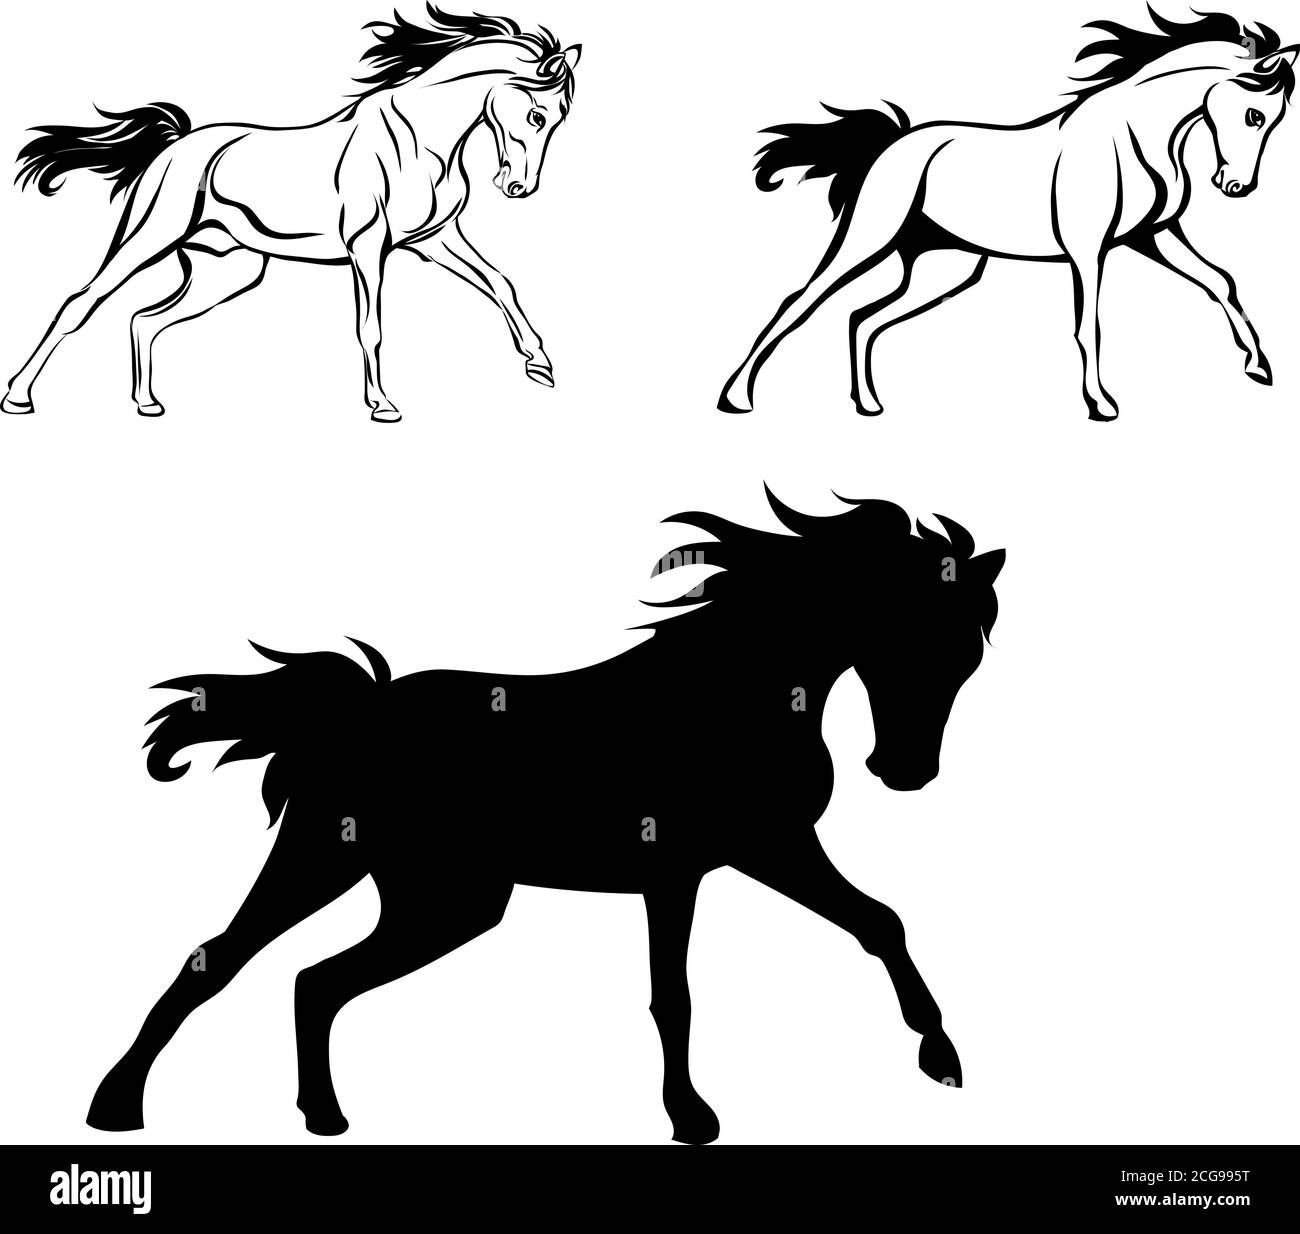 Horse, drawing, black, silhouette, symbol, illustration, image, picture, isolated, races, vector, line, gallop, head, mane, stallion, stock-raising Stock Vector